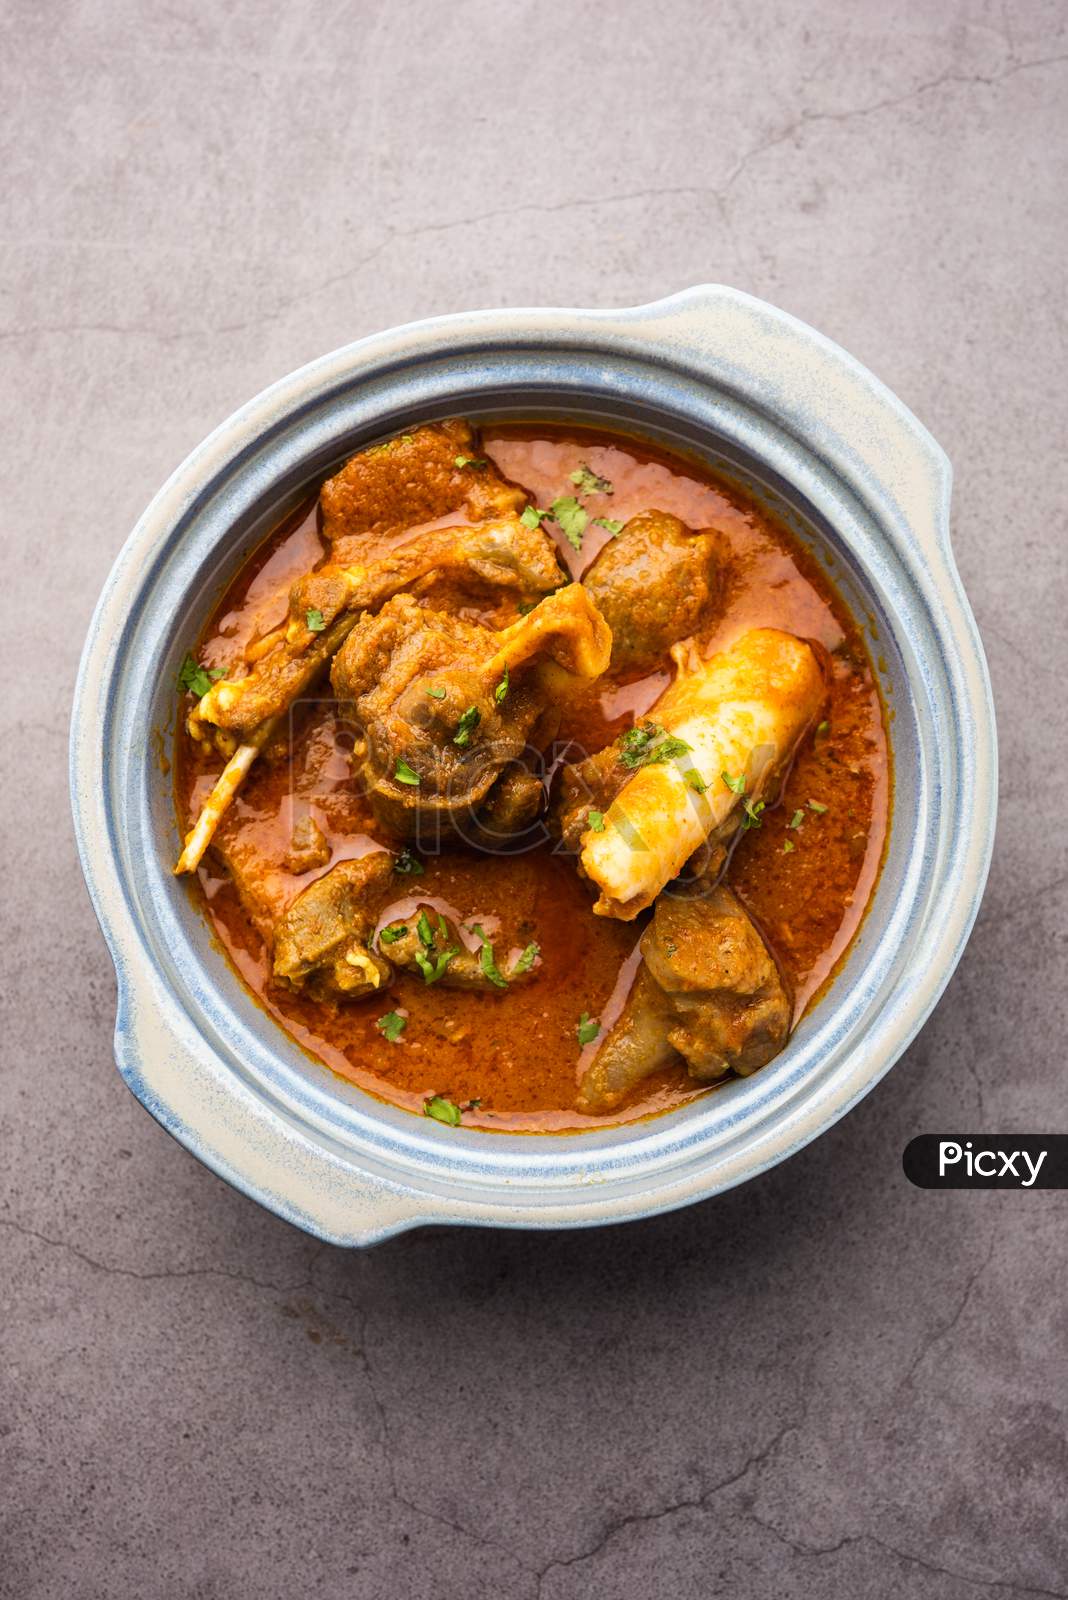 Indian Style Meat Dish Or Mutton Or Gosht Masala Or Lamb Rogan Josh Served In A Bowl, Selective Focus